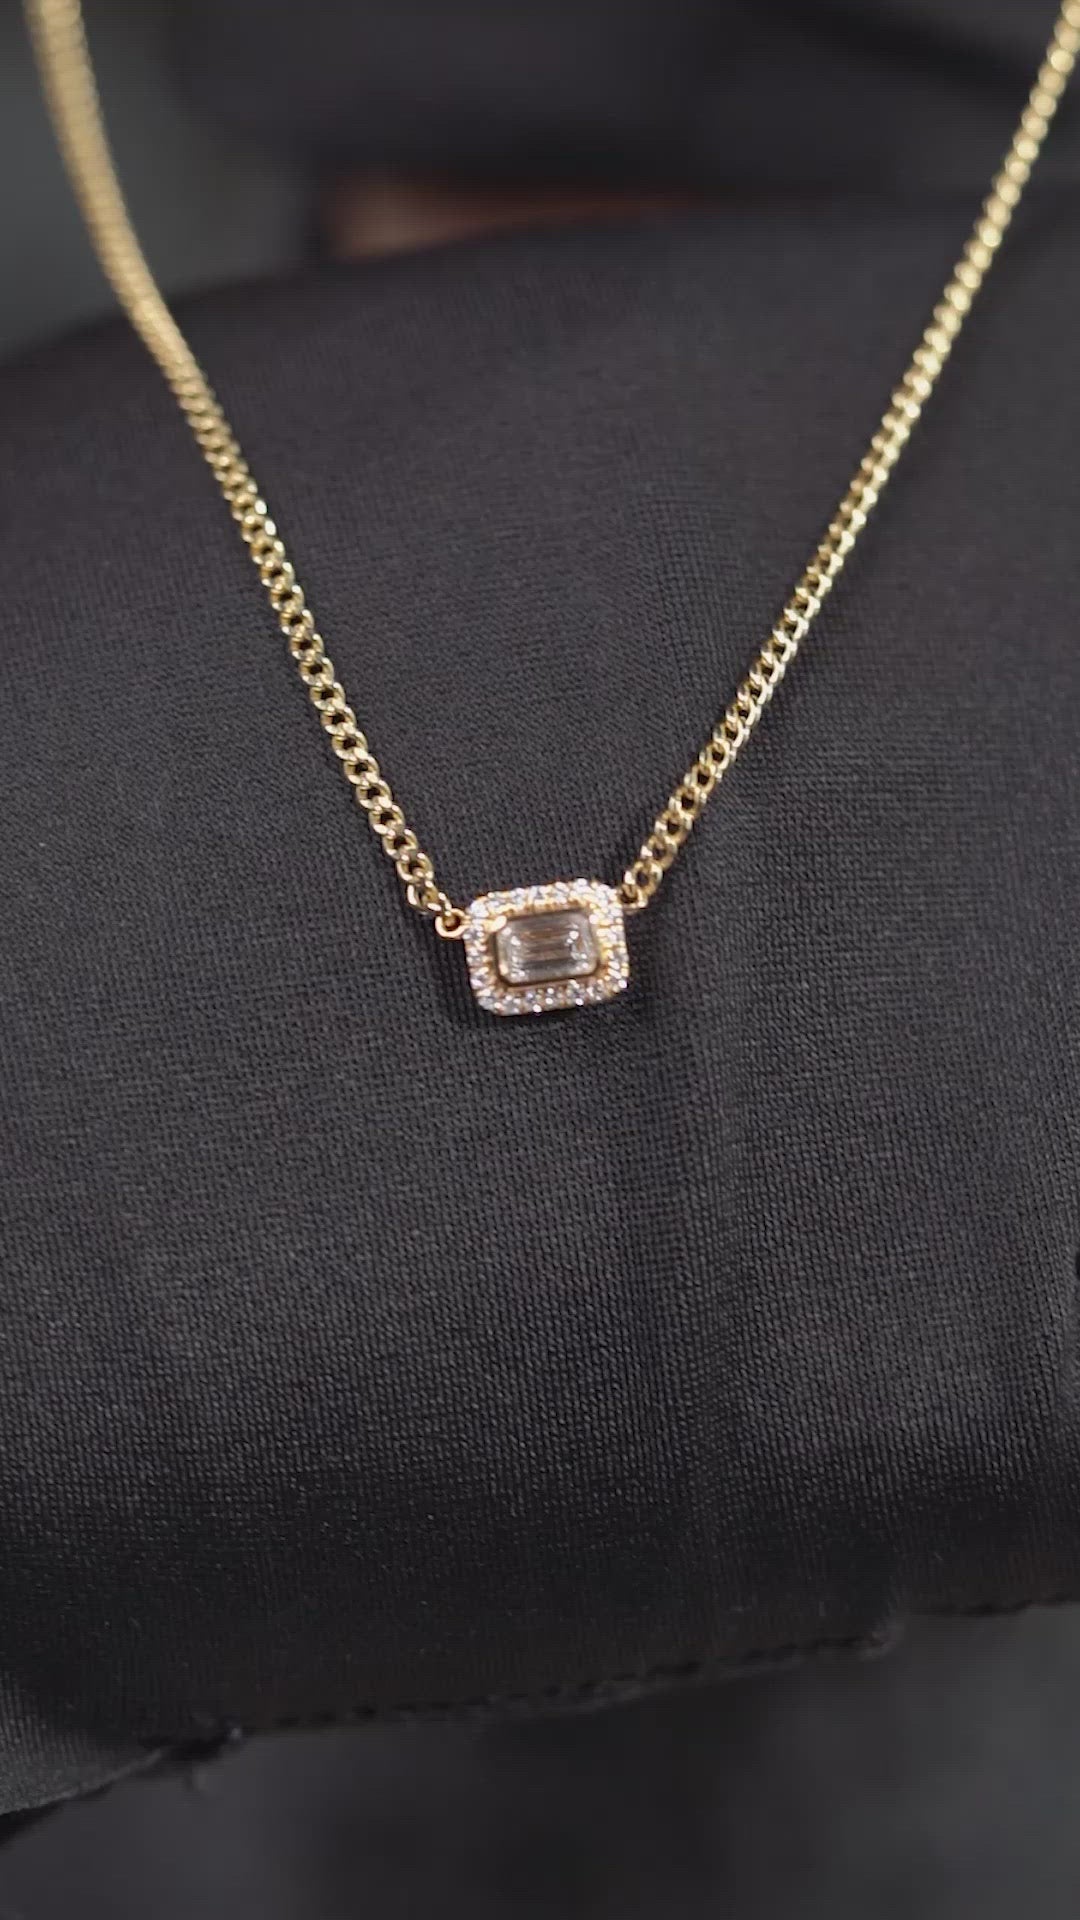 Emerald Cut Diamond Necklace with Halo 18K Yellow Gold